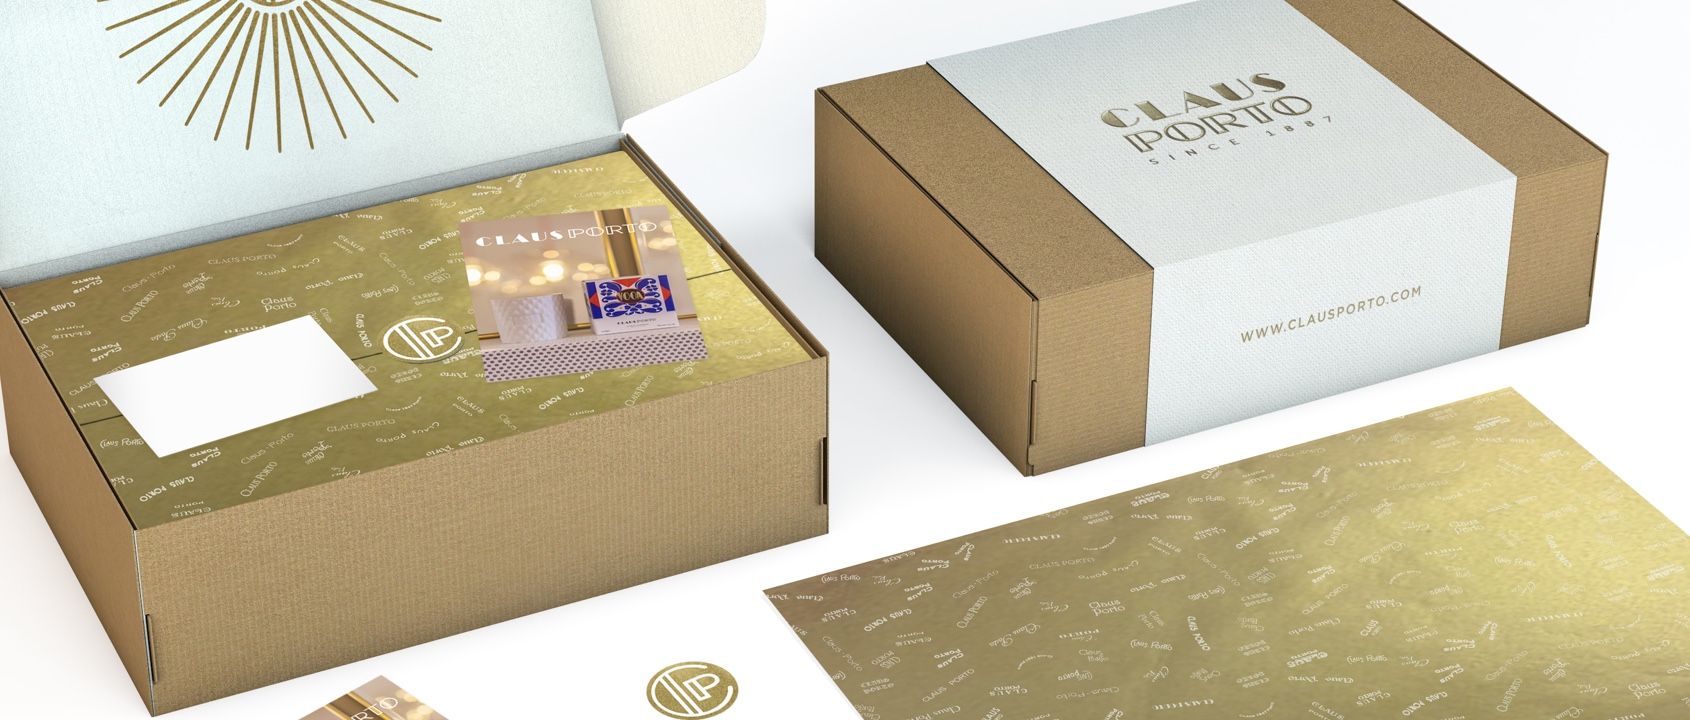 Claus Porto eCommerce Packaging